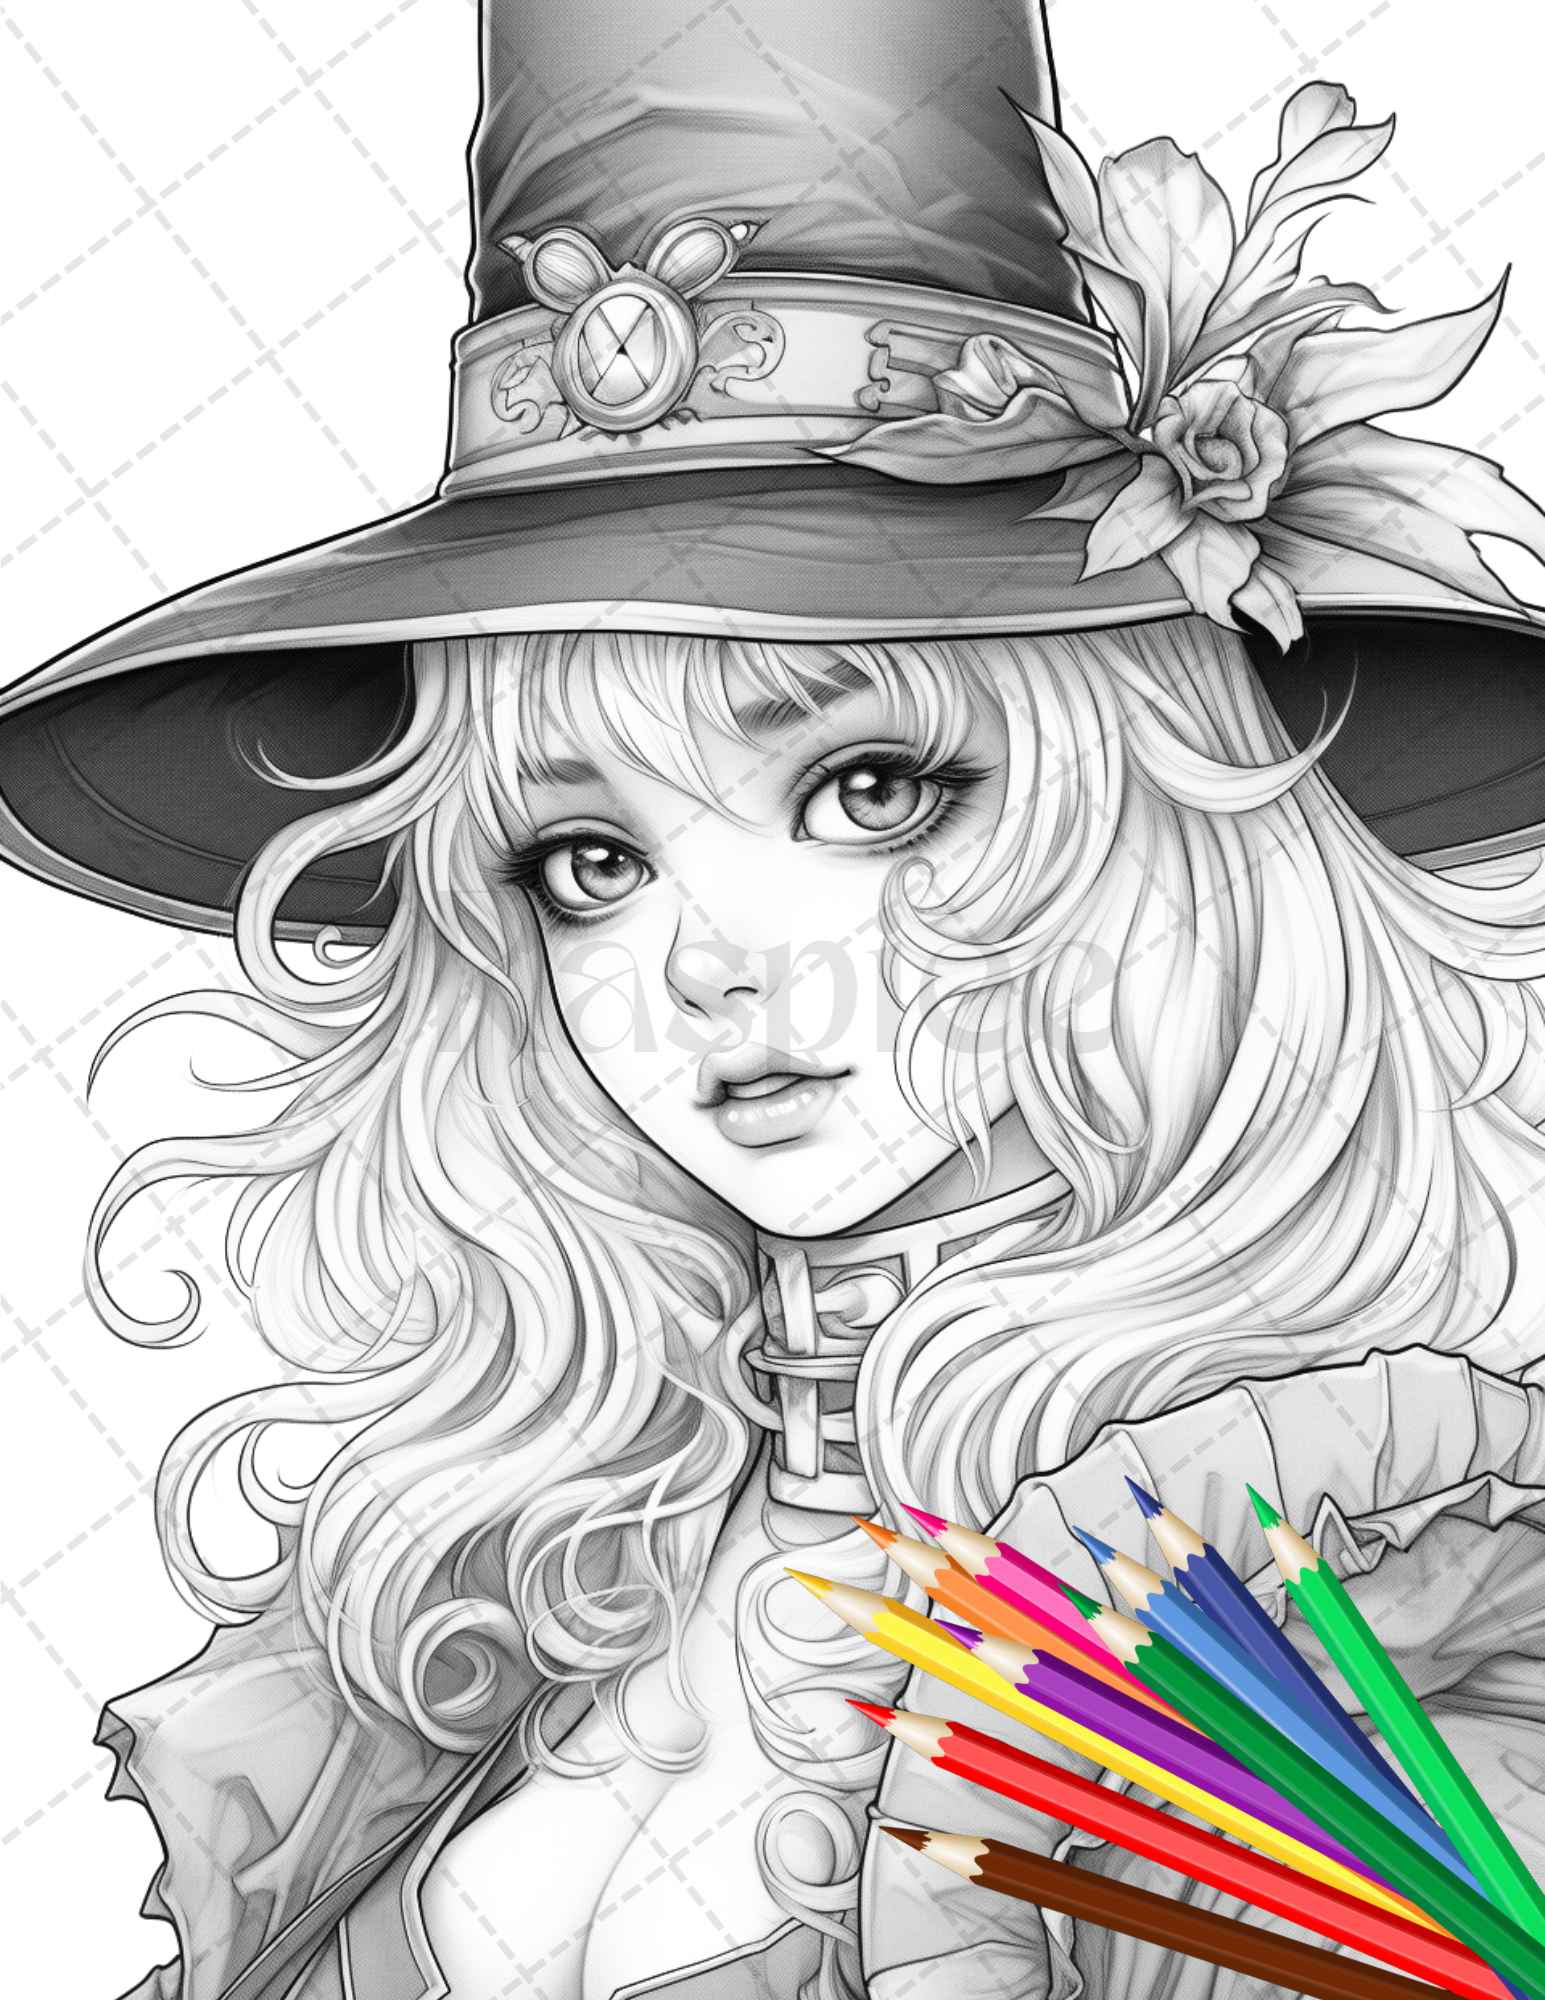 Autumn Witch Coloring Page - KPBeachan's Ko-fi Shop - Ko-fi ❤️ Where  creators get support from fans through donations, memberships, shop sales  and more! The original 'Buy Me a Coffee' Page.